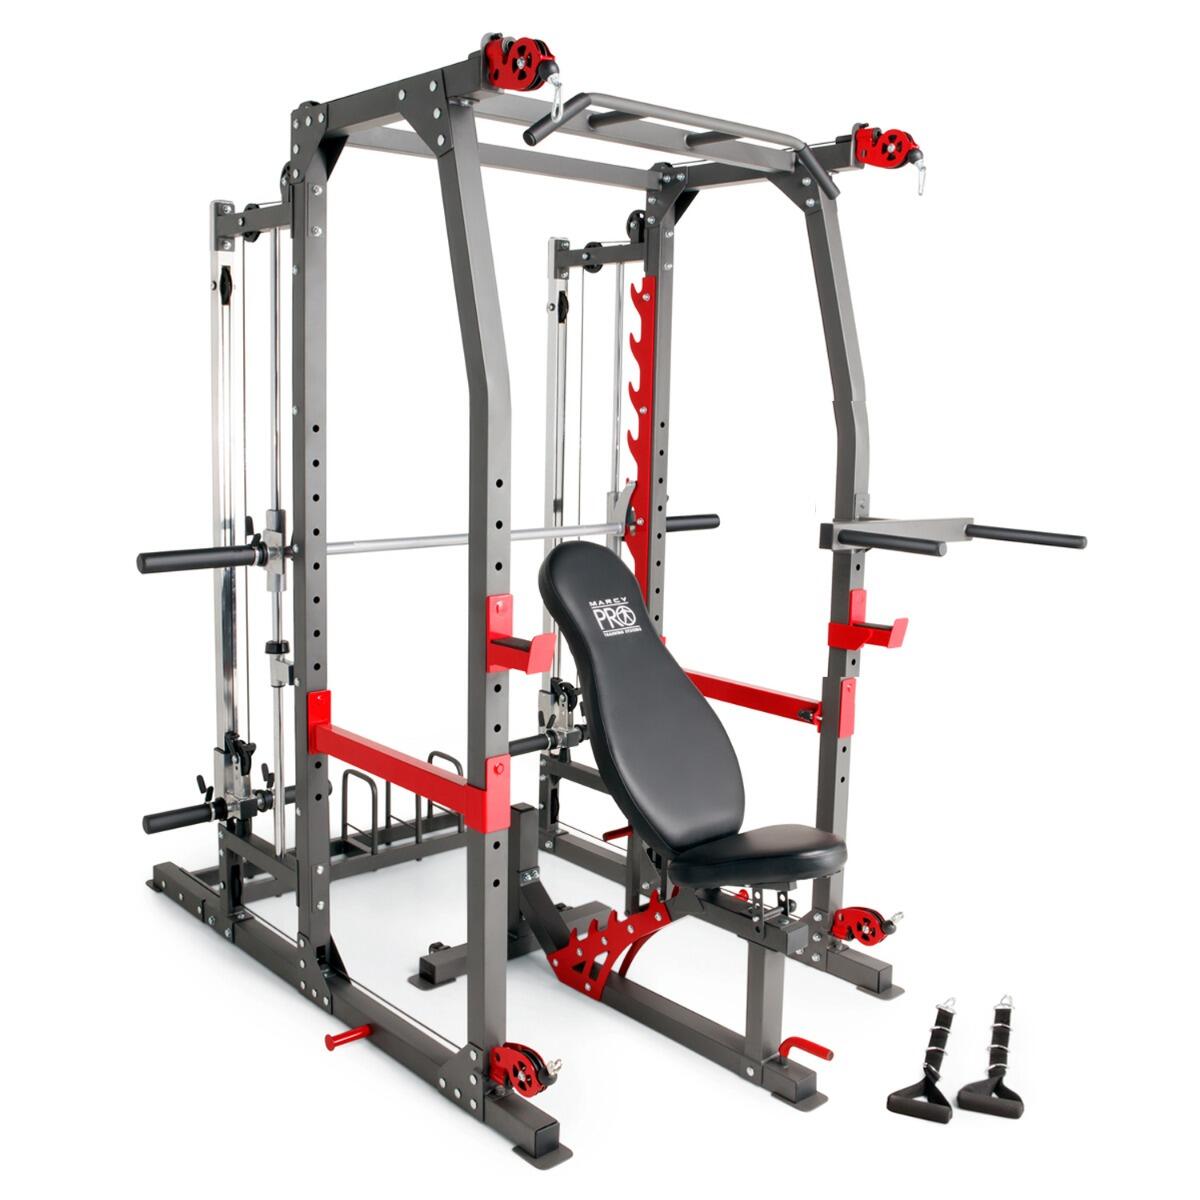 MARCY MARCY PRO SM4903 MULTI GYM CAGE SMITH MACHINE & ADJUSTABLE WEIGHT BENCH